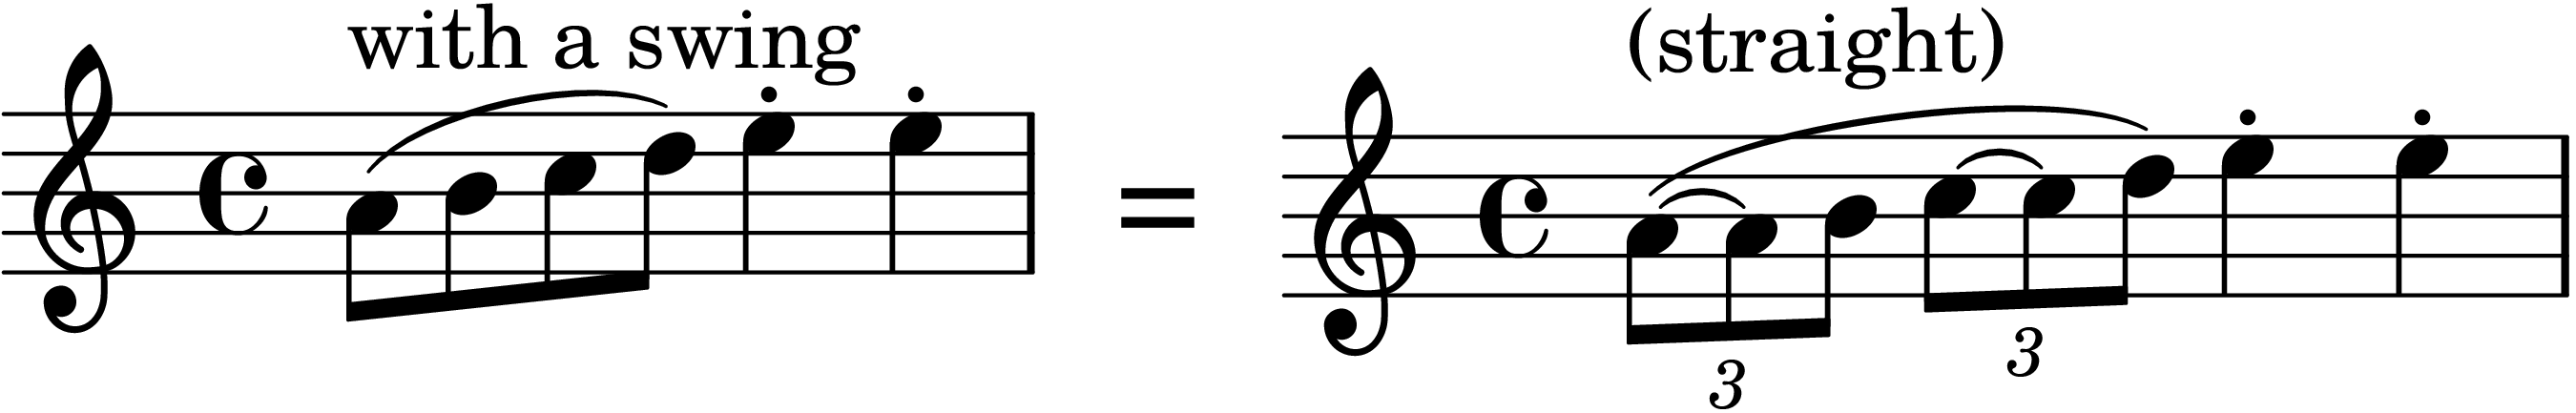 Musical notation for swung notes